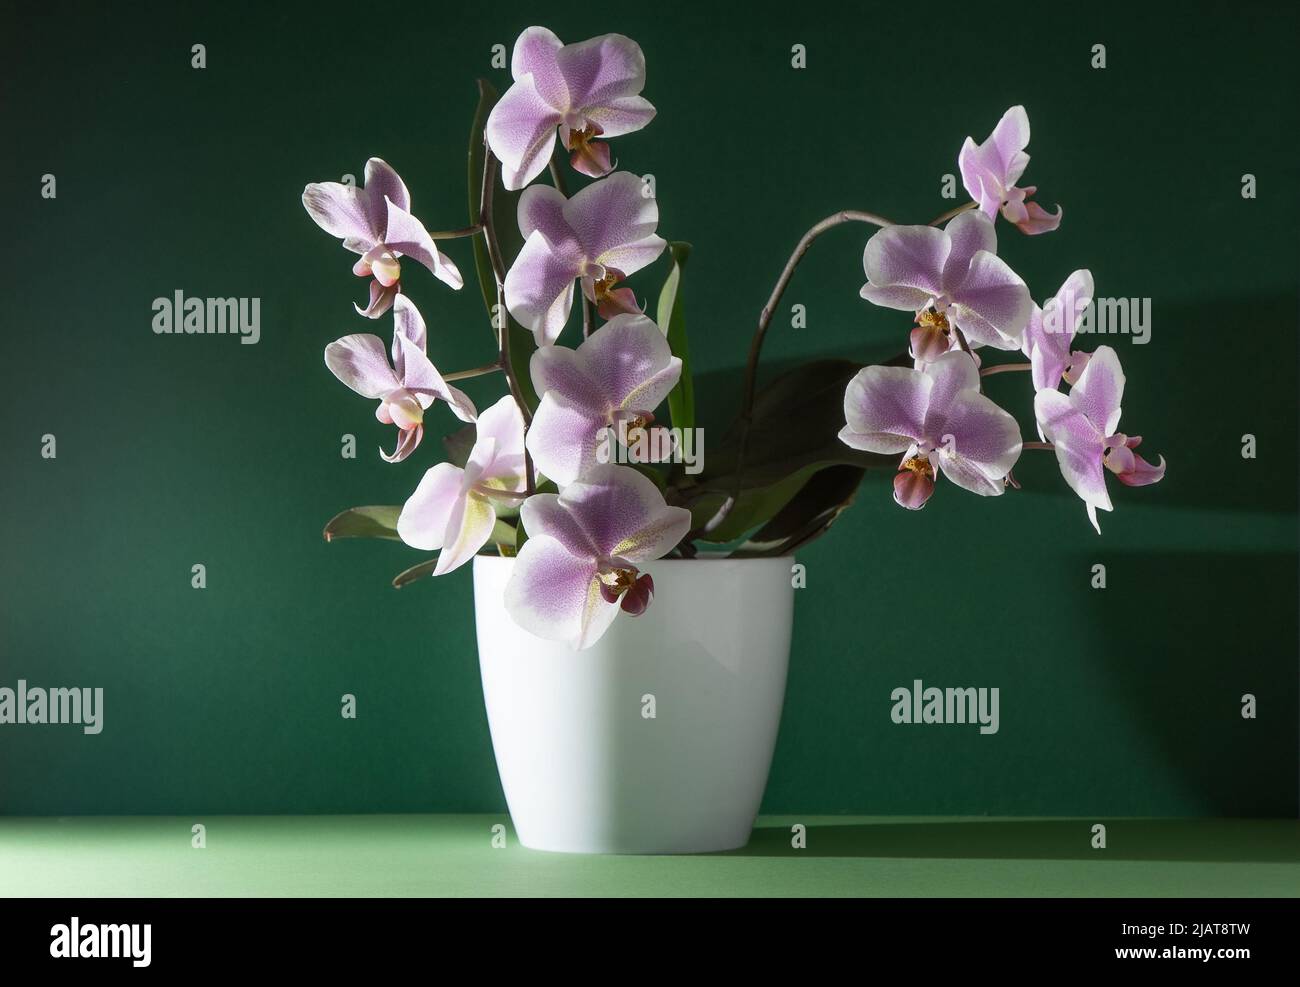 Pink orchid two branches. White purple phalaenopsis buds. Phalaenopsis indoor flower. Flowers on a green background. Blooming orchids in pot close up. Stock Photo